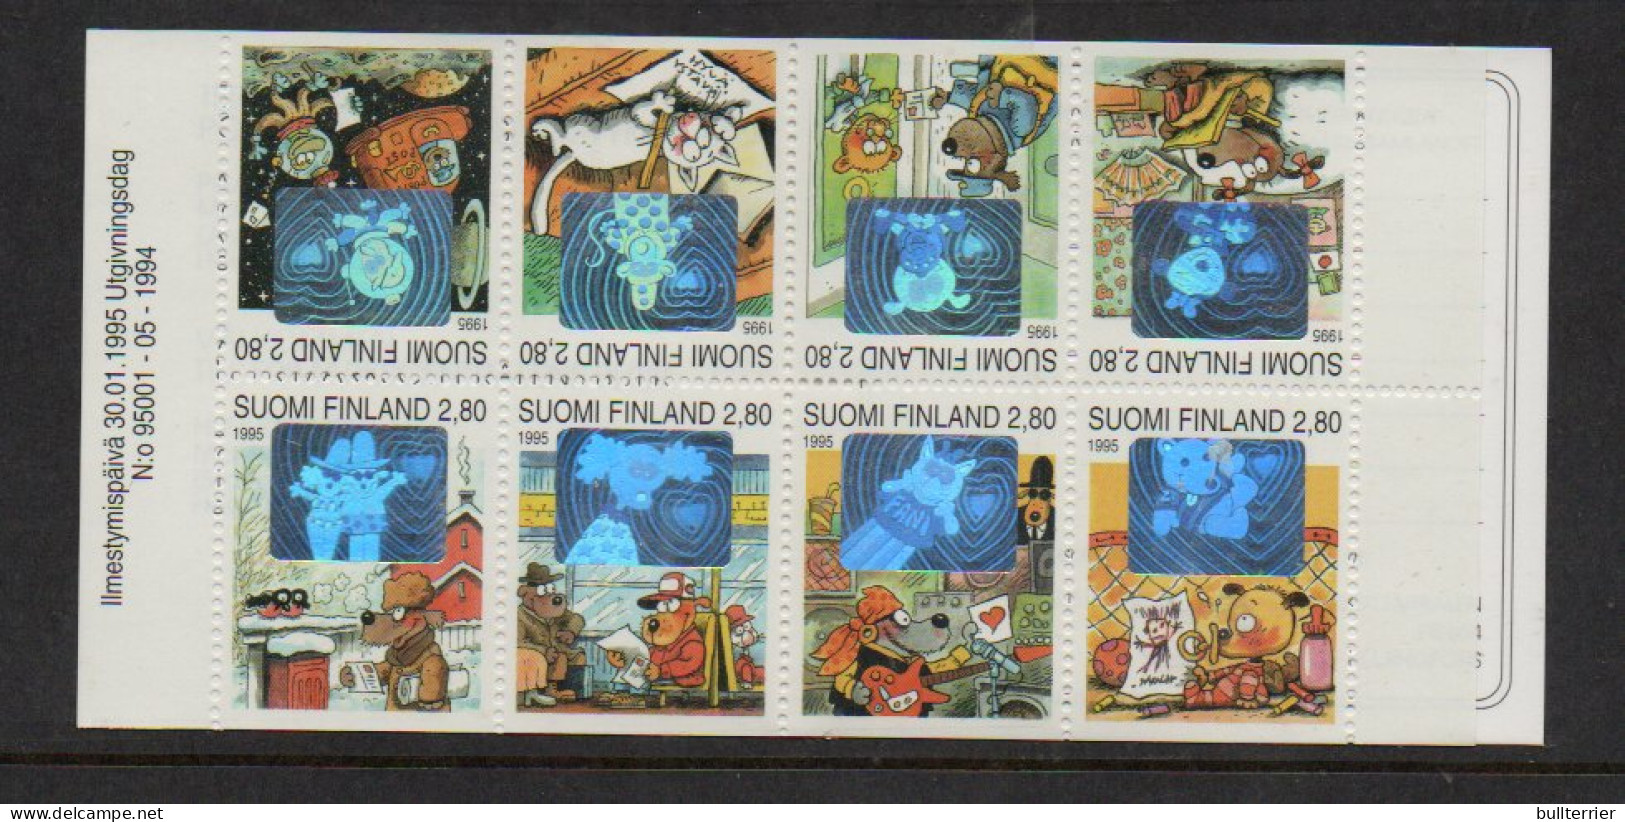 FINLAND - 1995 GREETINGS HOLOGRAM STAMPS BOOKLET COMPLET  MINT NEVER HINGED  SG CAT £20 - Ungebraucht